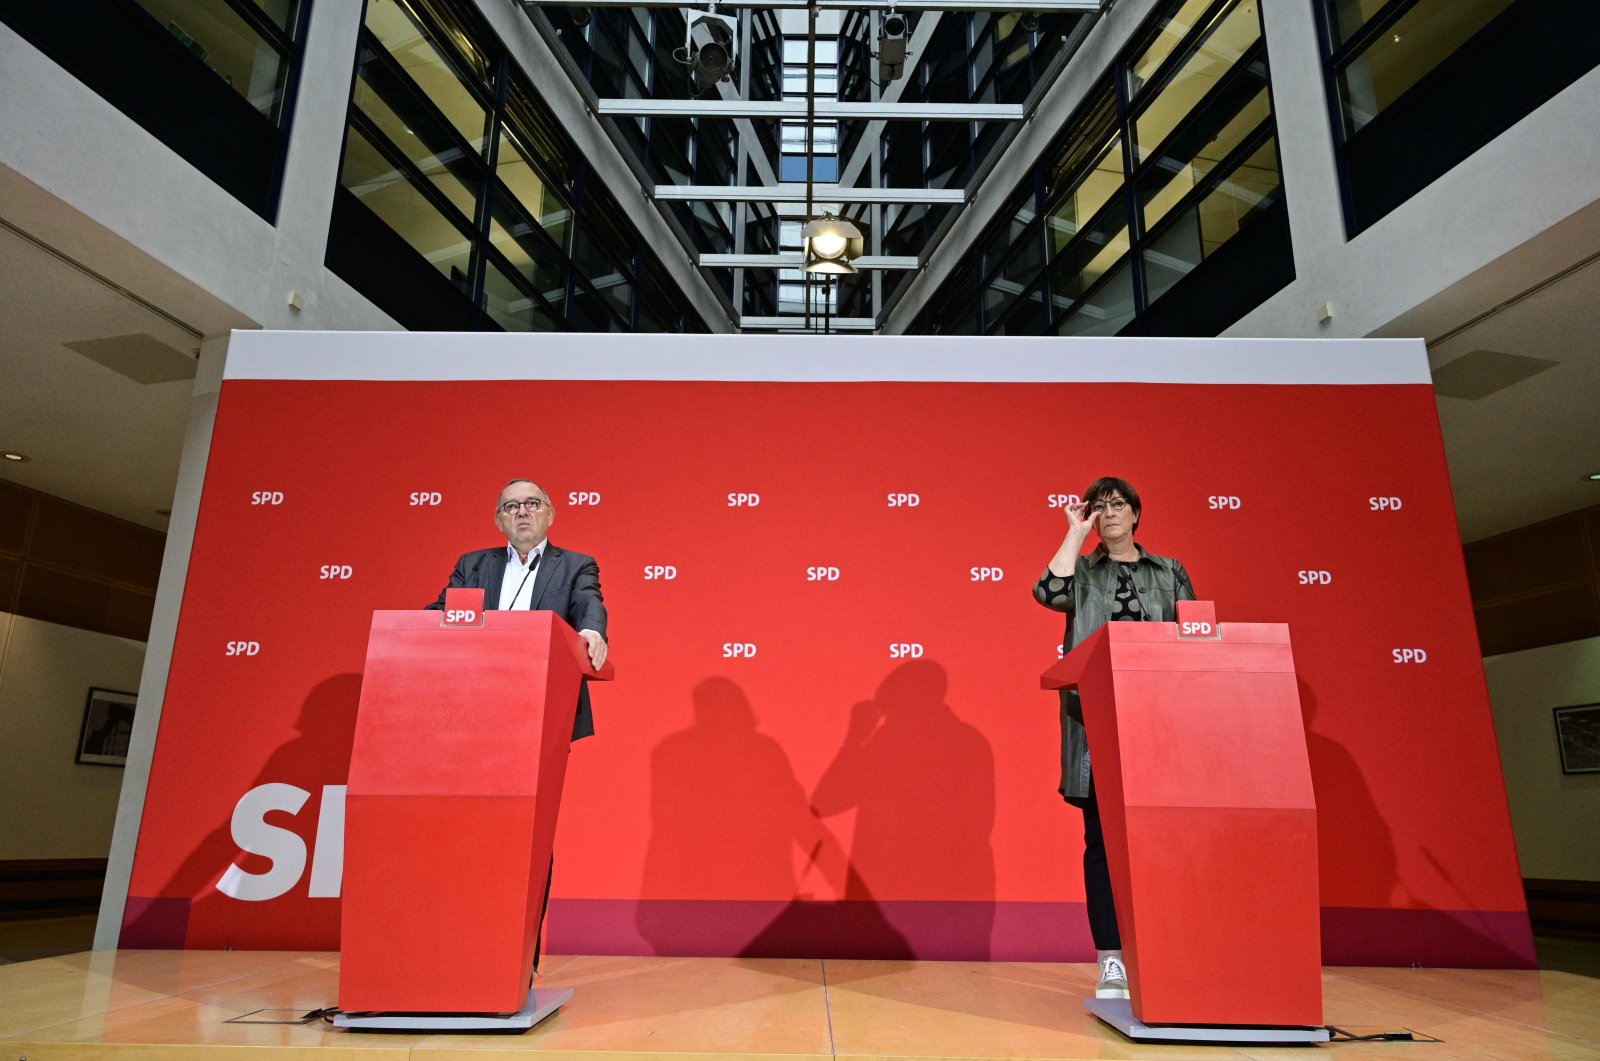 Germany's Social Democratic SPD party co-leader Norbert Walter-Borjans (L) and Germany's Social Democratic SPD party co-leader Saskia Esken give a joint press conference in Berlin on Nov. 9, 2021. (AFP Photo)